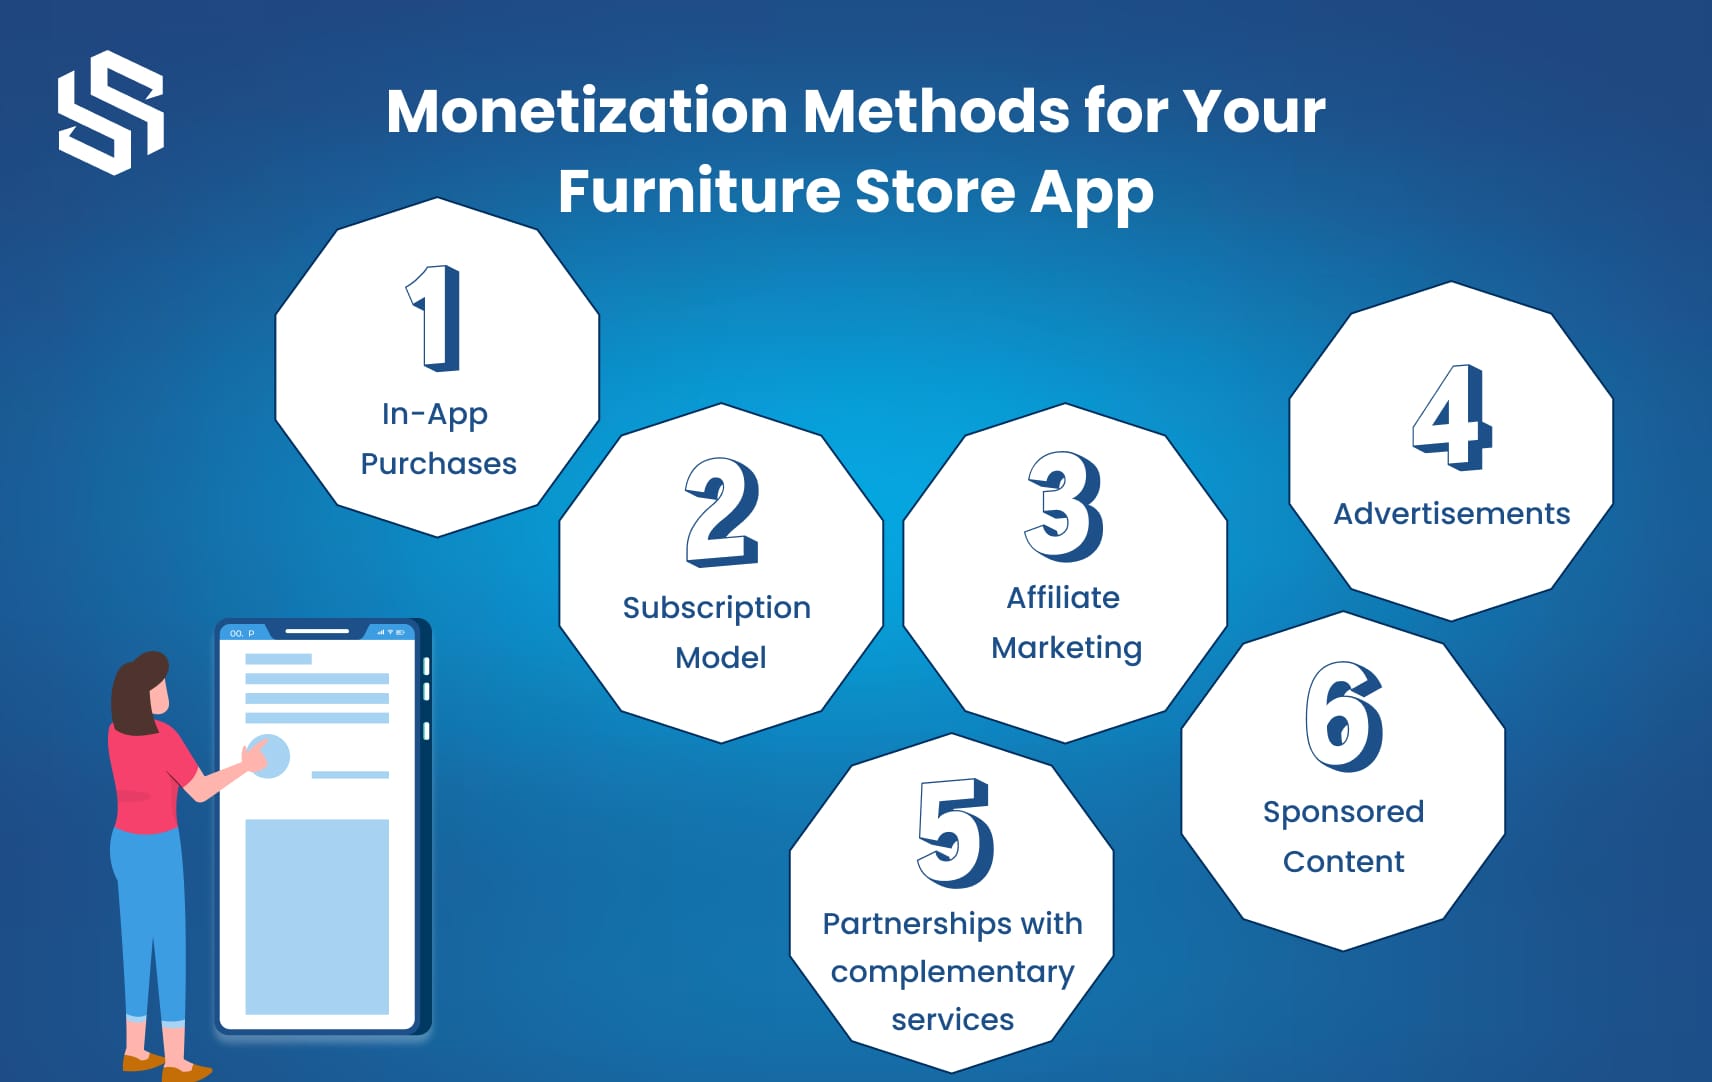 Monetization Methods for Your Furniture Store App